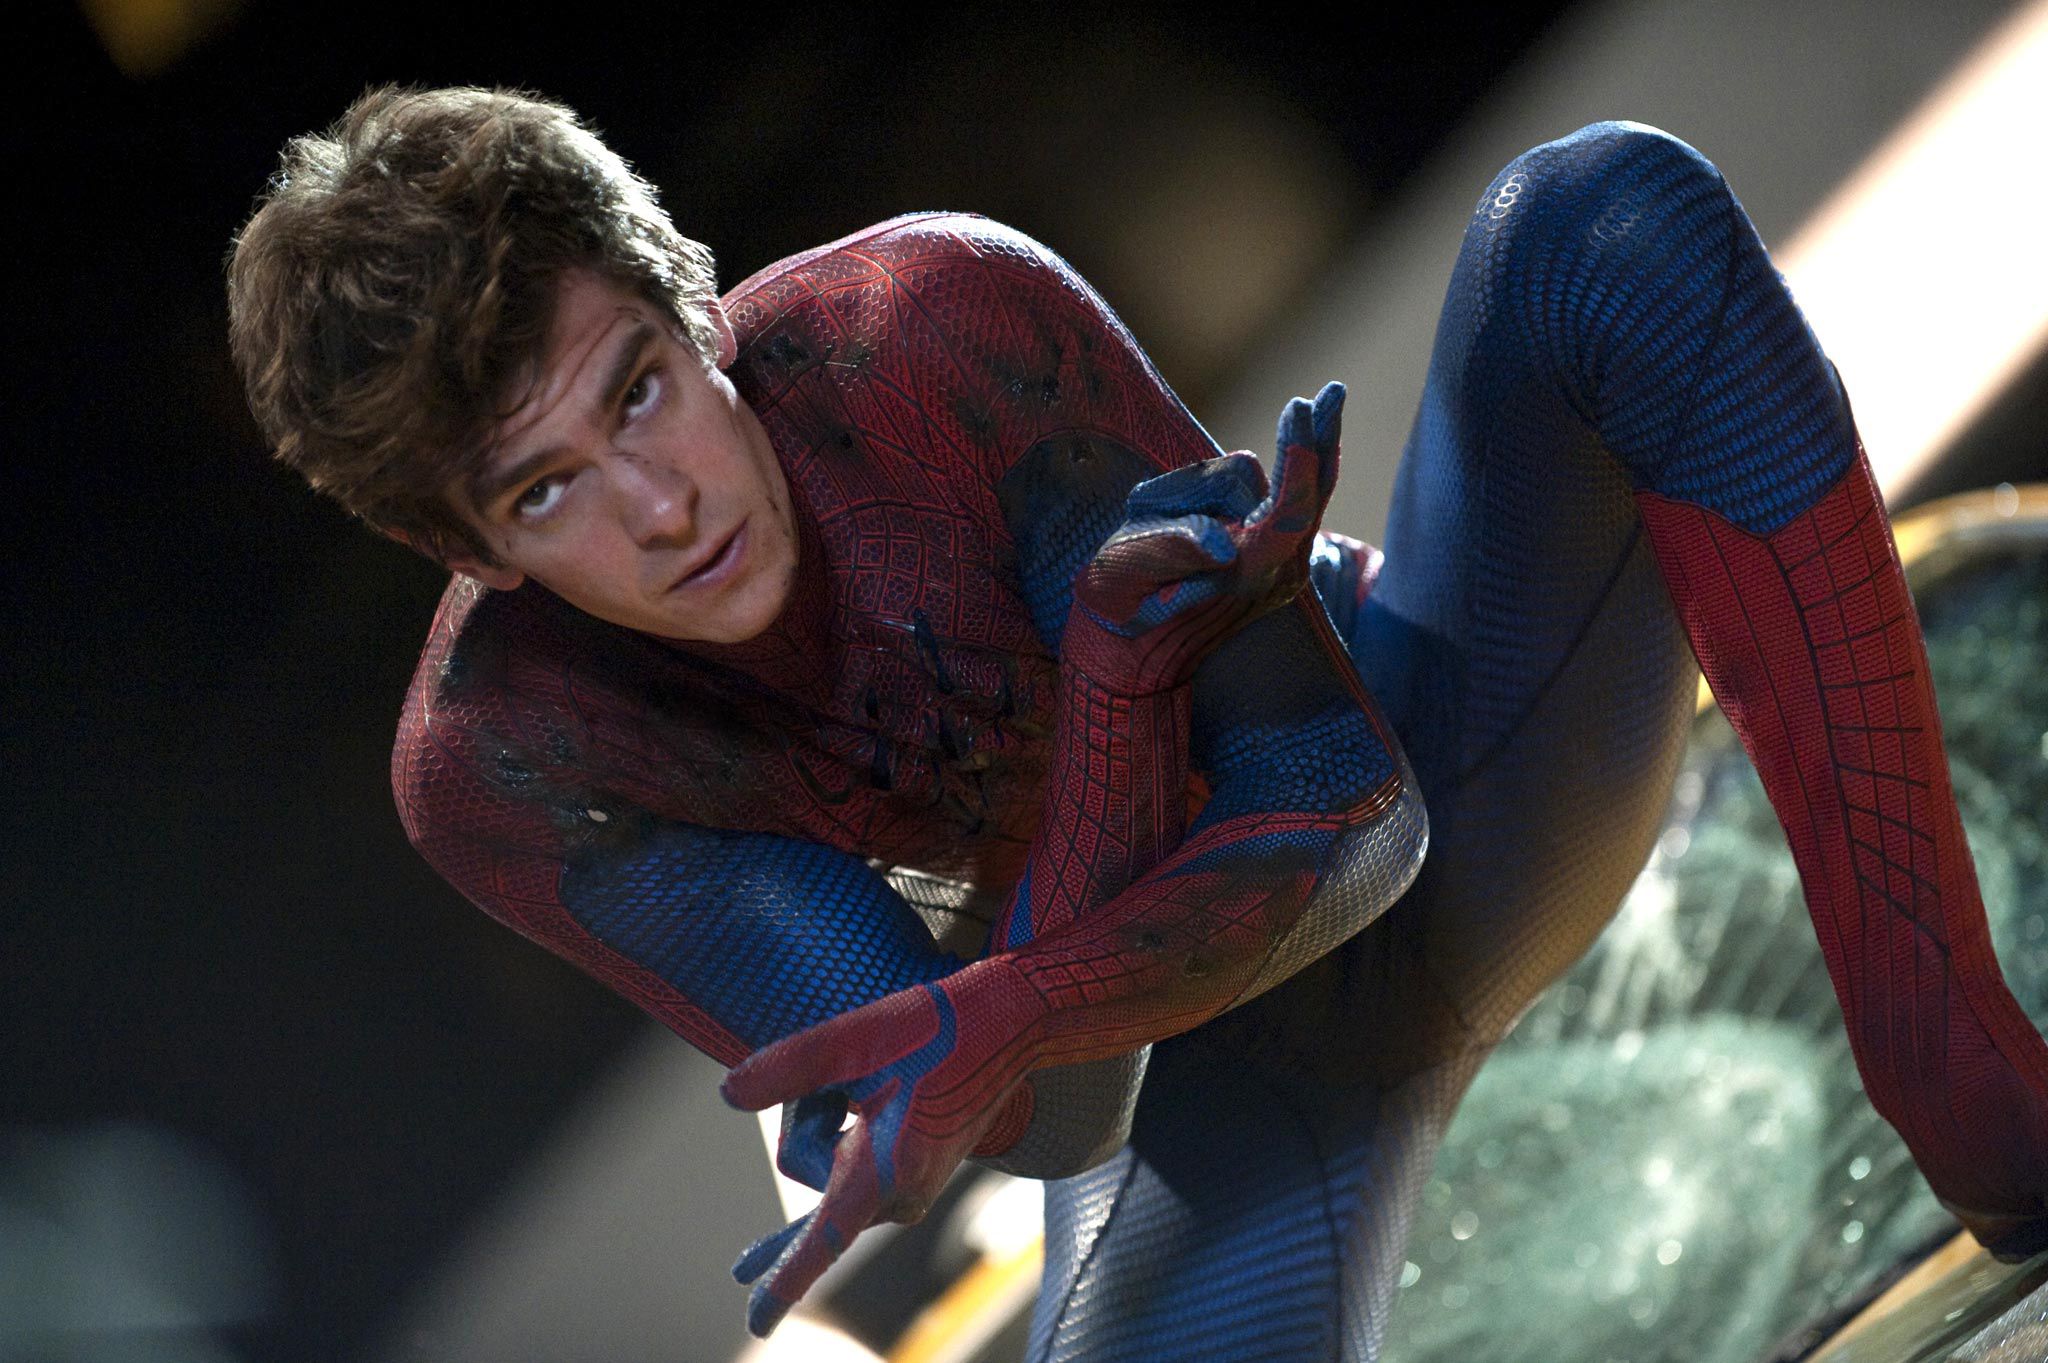 Andrew Garfield in The Amazing Spider-Man 2 Costume - No Mask